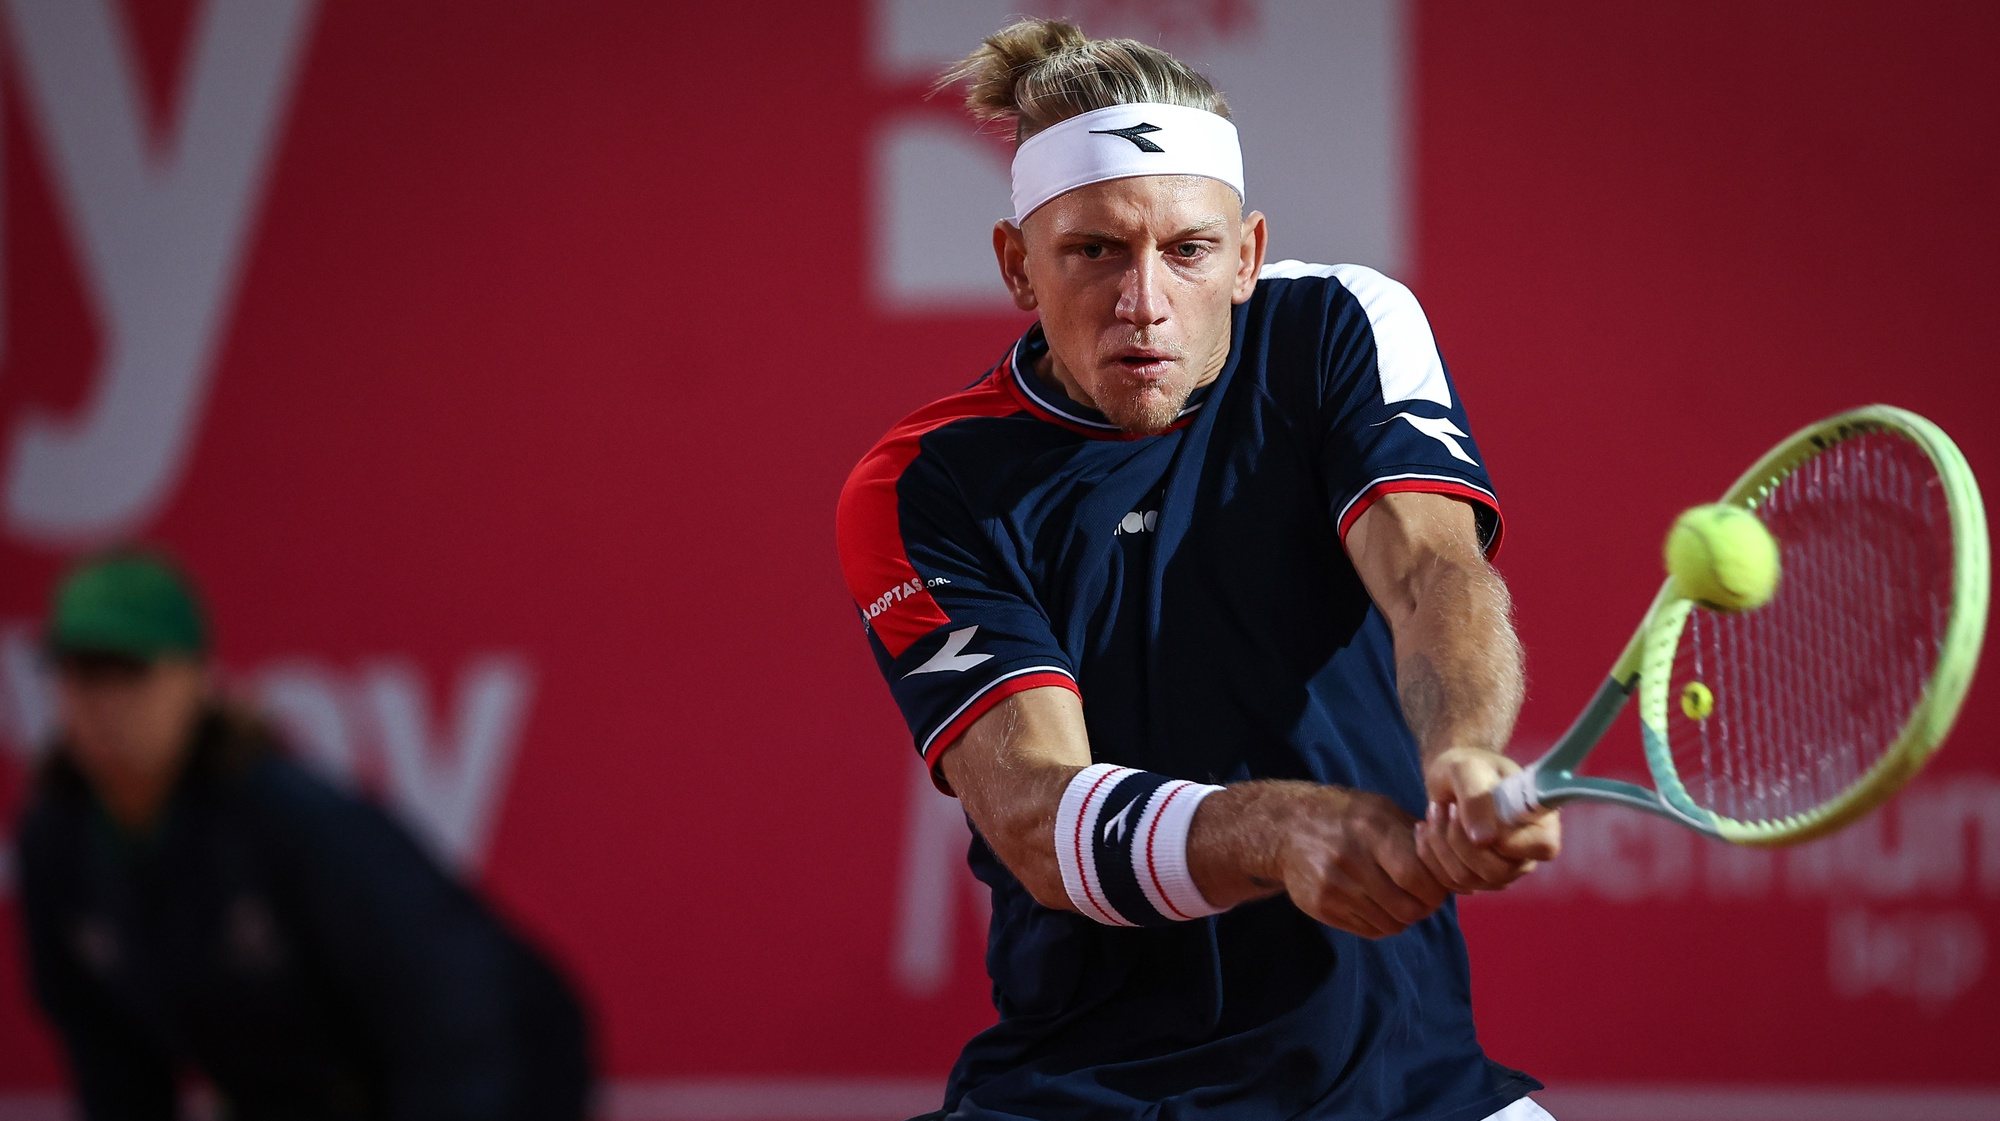 Fokina from Spain in action against Van Assche from France in the Round of 32 match at the Estoril Open tennis tournament in Estoril, Portugal, 05 April 2023. RODRIGO ANTUNES/LUSA